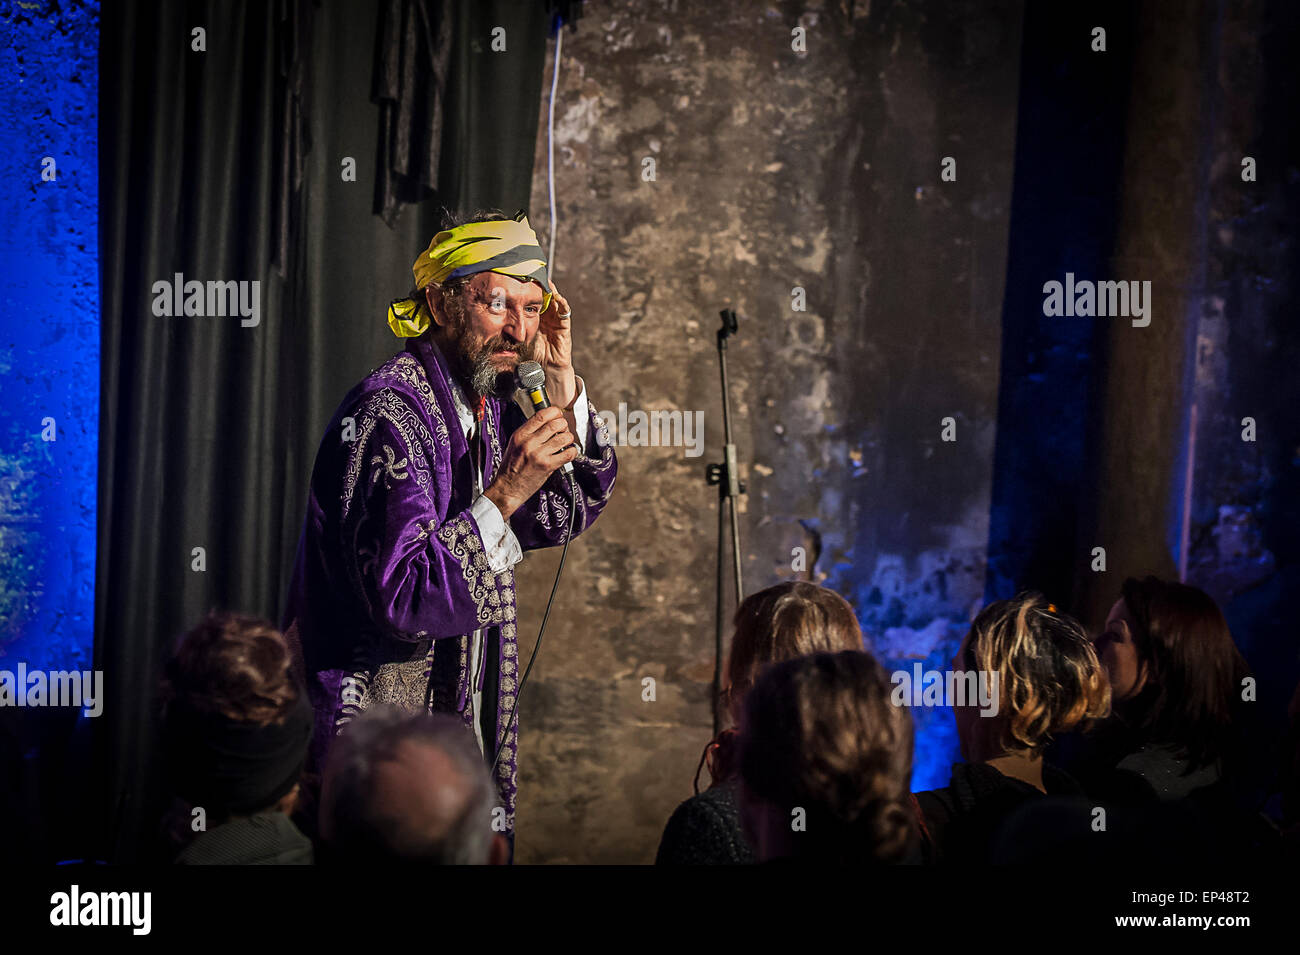 Phil Kay performing in an unusual performance space, Brunel's Shaft at the Brunel Museum in Rotherhithe. Stock Photo